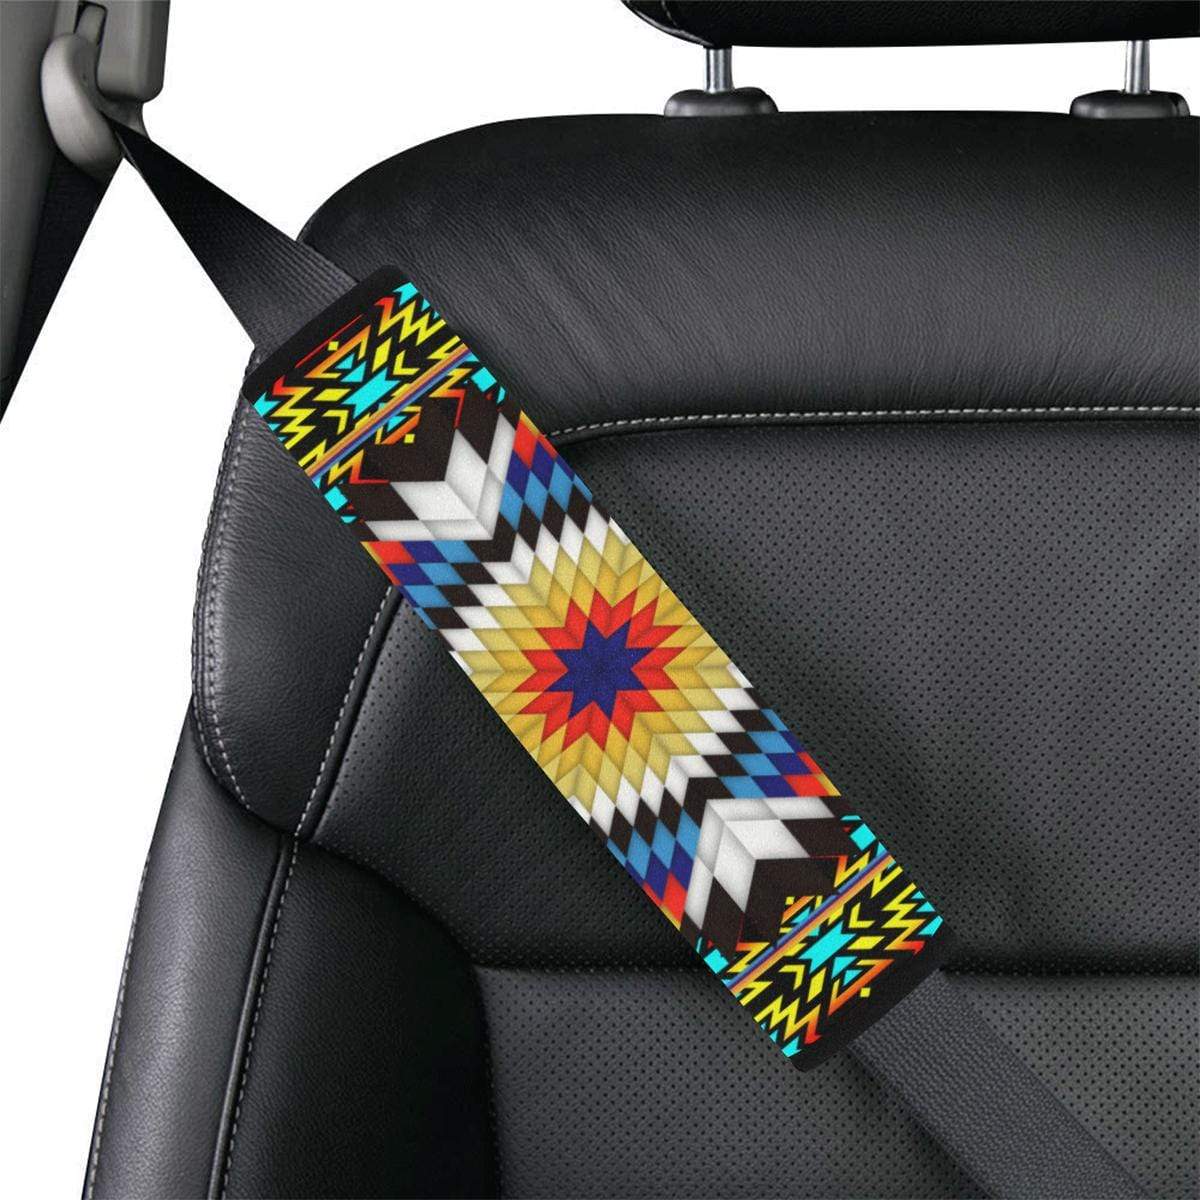 Blackfire and Turquoise Star Car Seat Belt Cover 7''x12.6'' Car Seat Belt Cover 7''x12.6'' e-joyer 